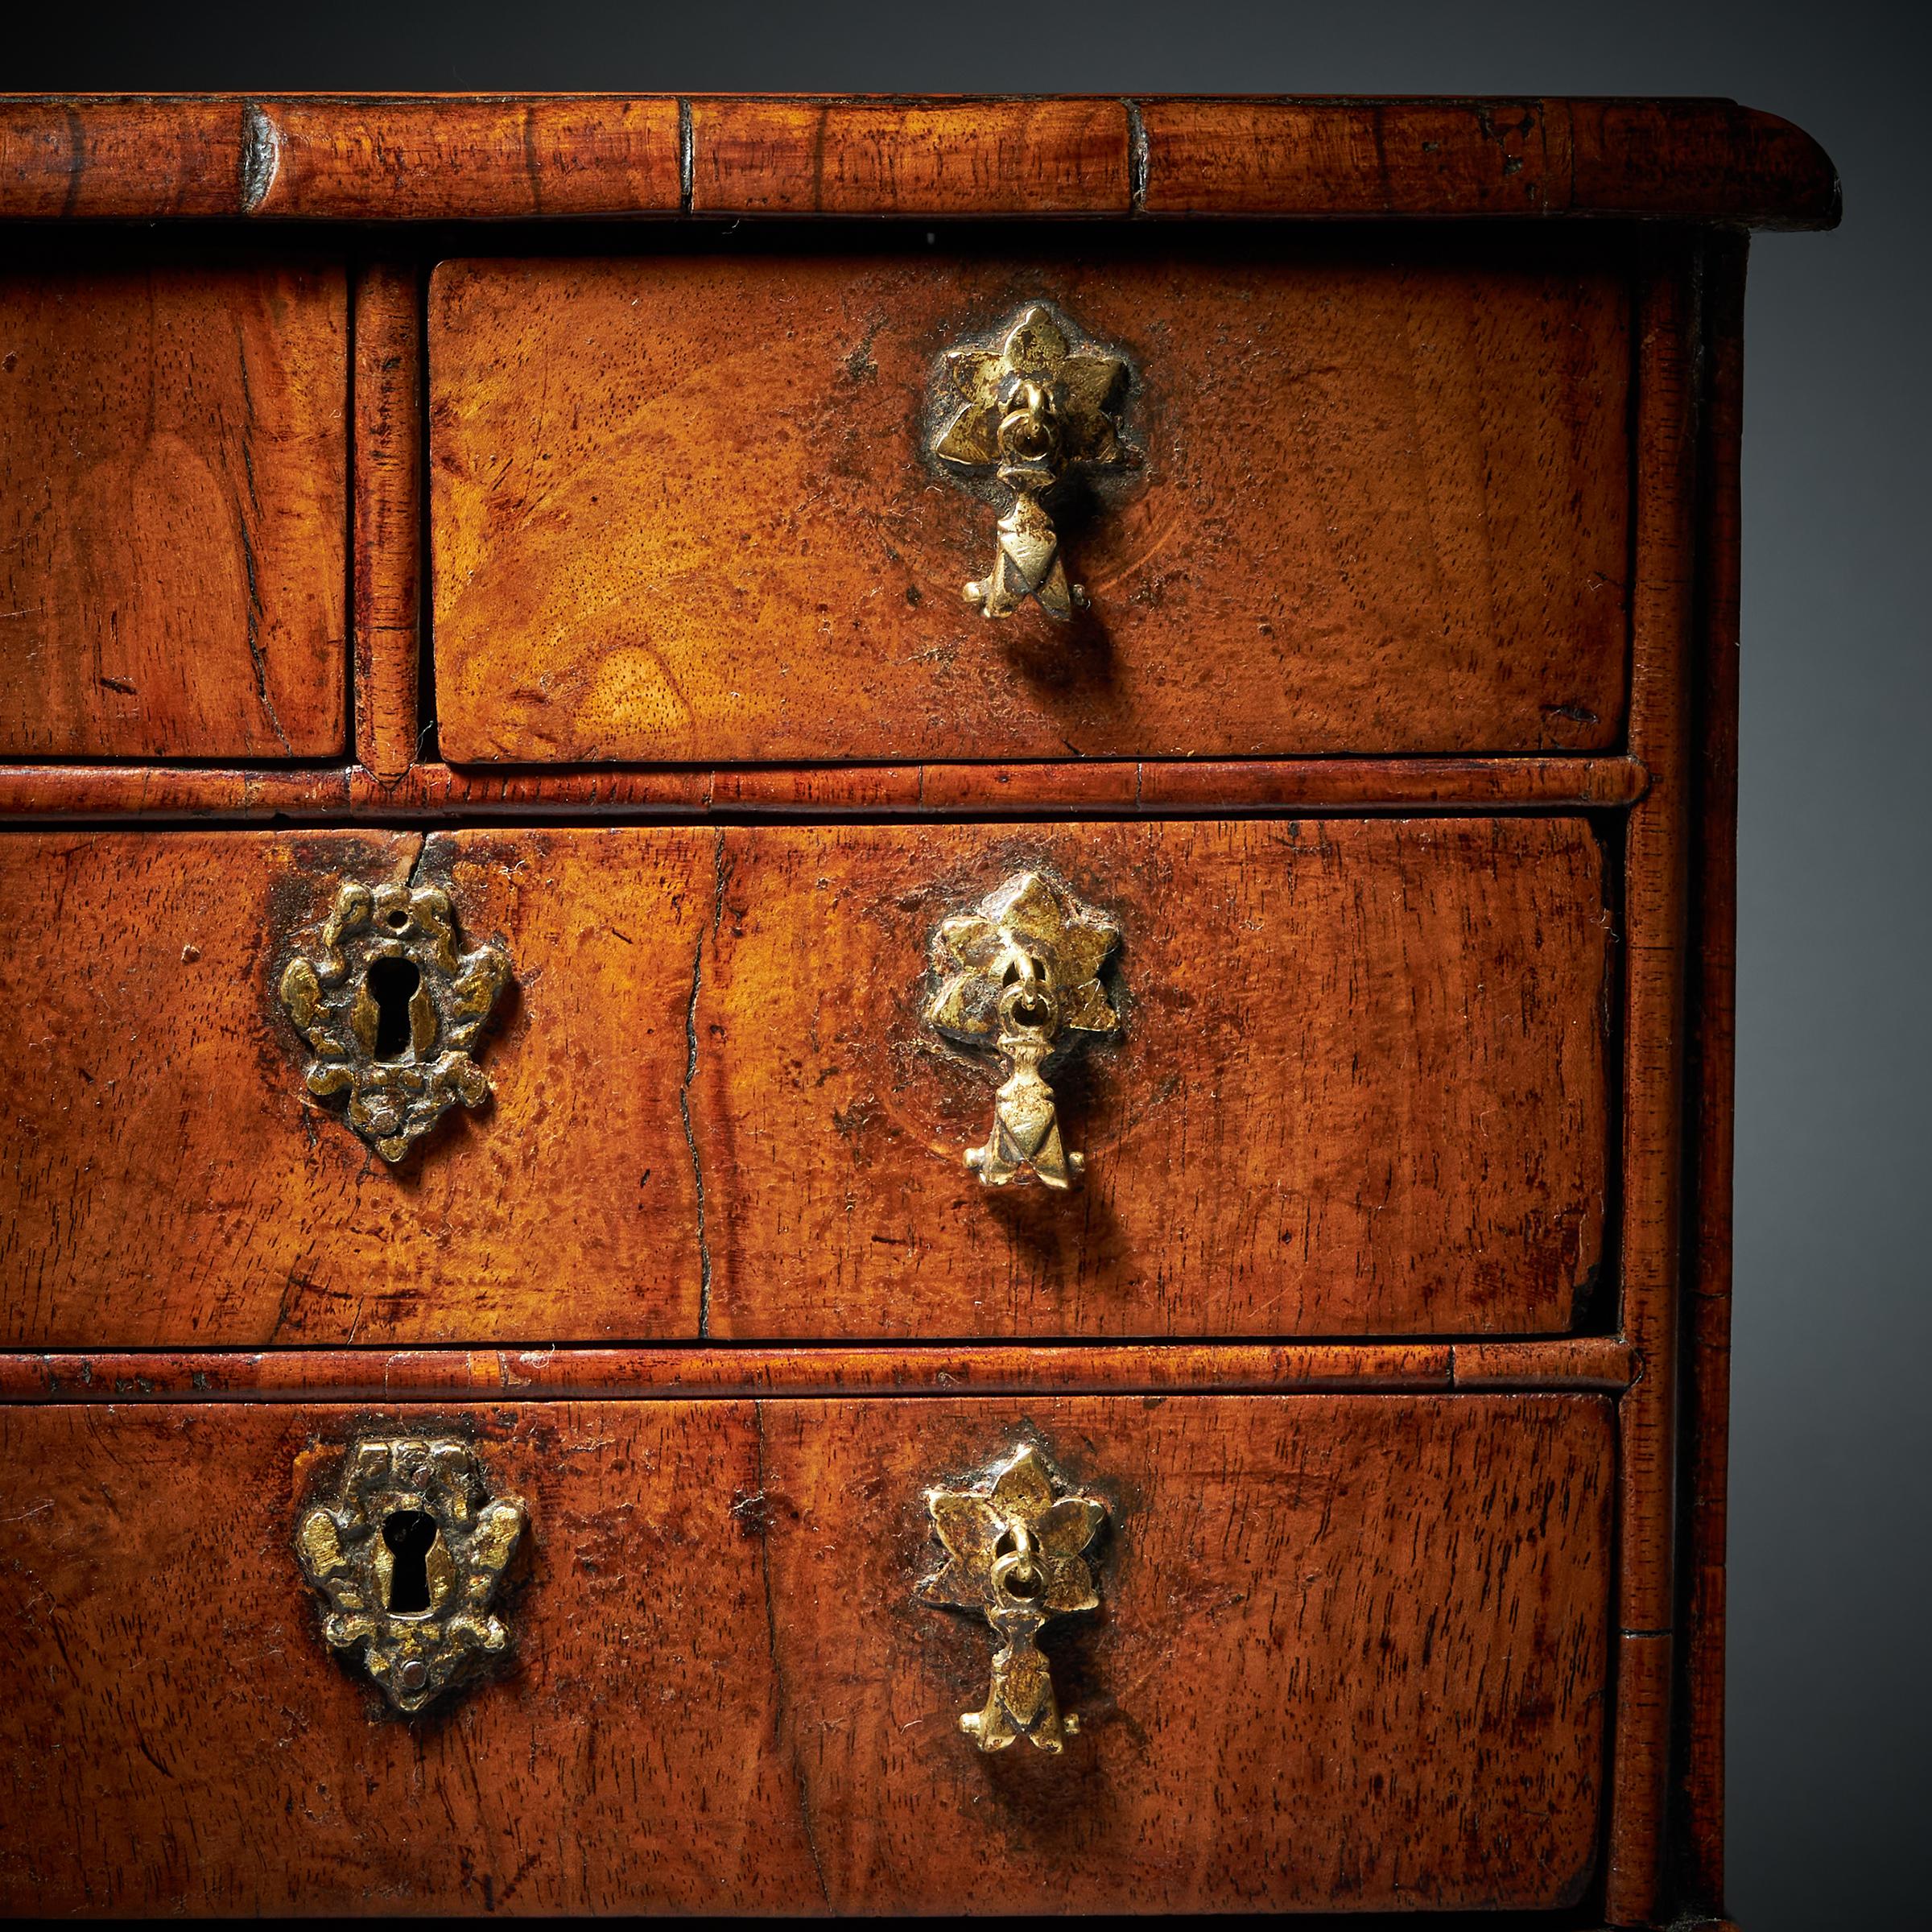 Rare 17th Century Miniature William and Mary Walnut Table Top Chest, circa 1690 For Sale 4